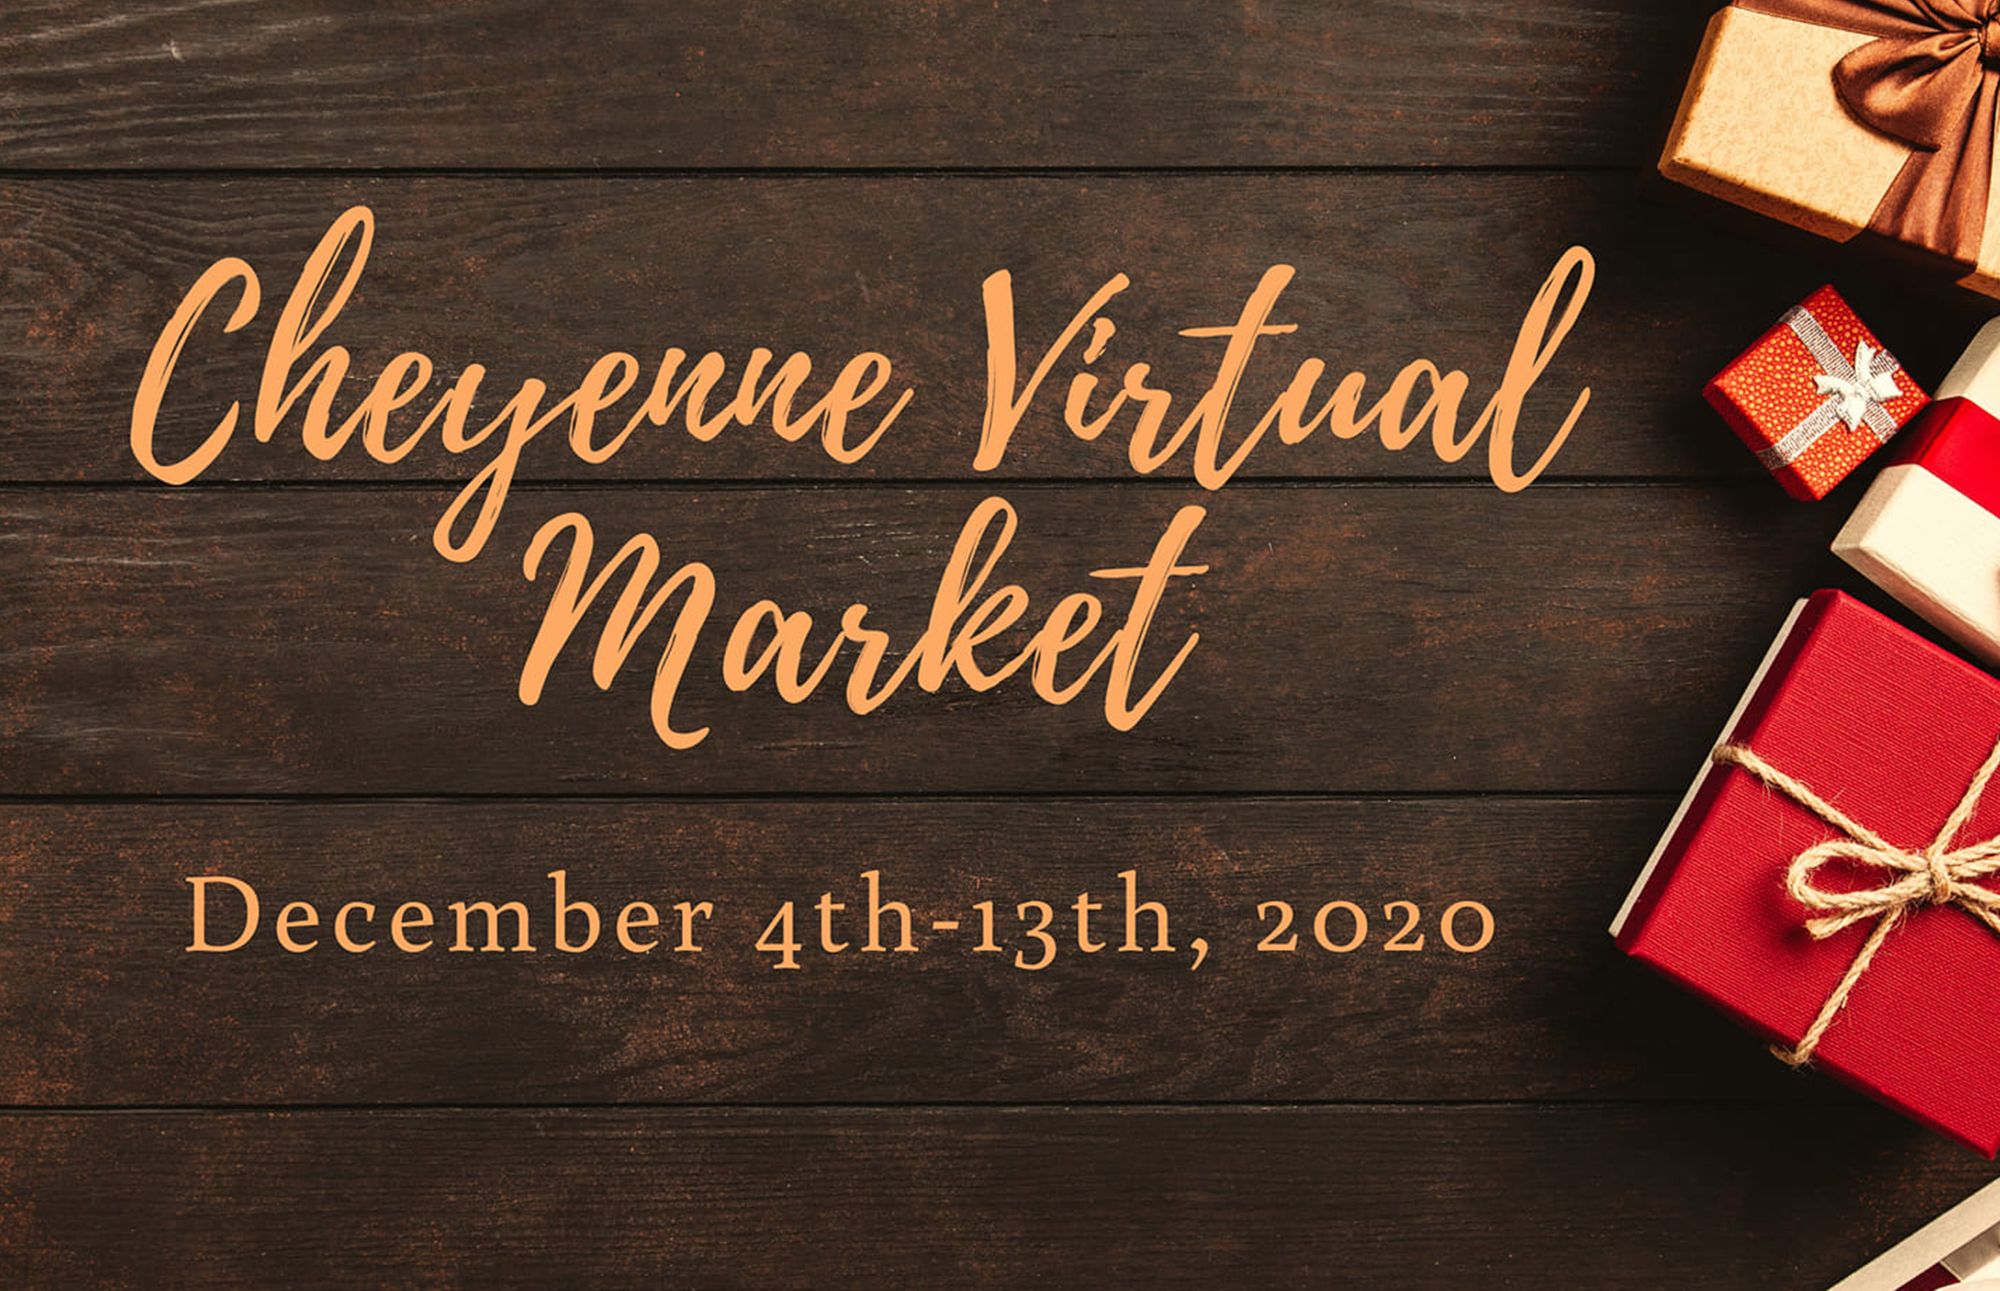 Checkout Cheyenne's Virtual Craft Market For All Of Your Holiday Shopping